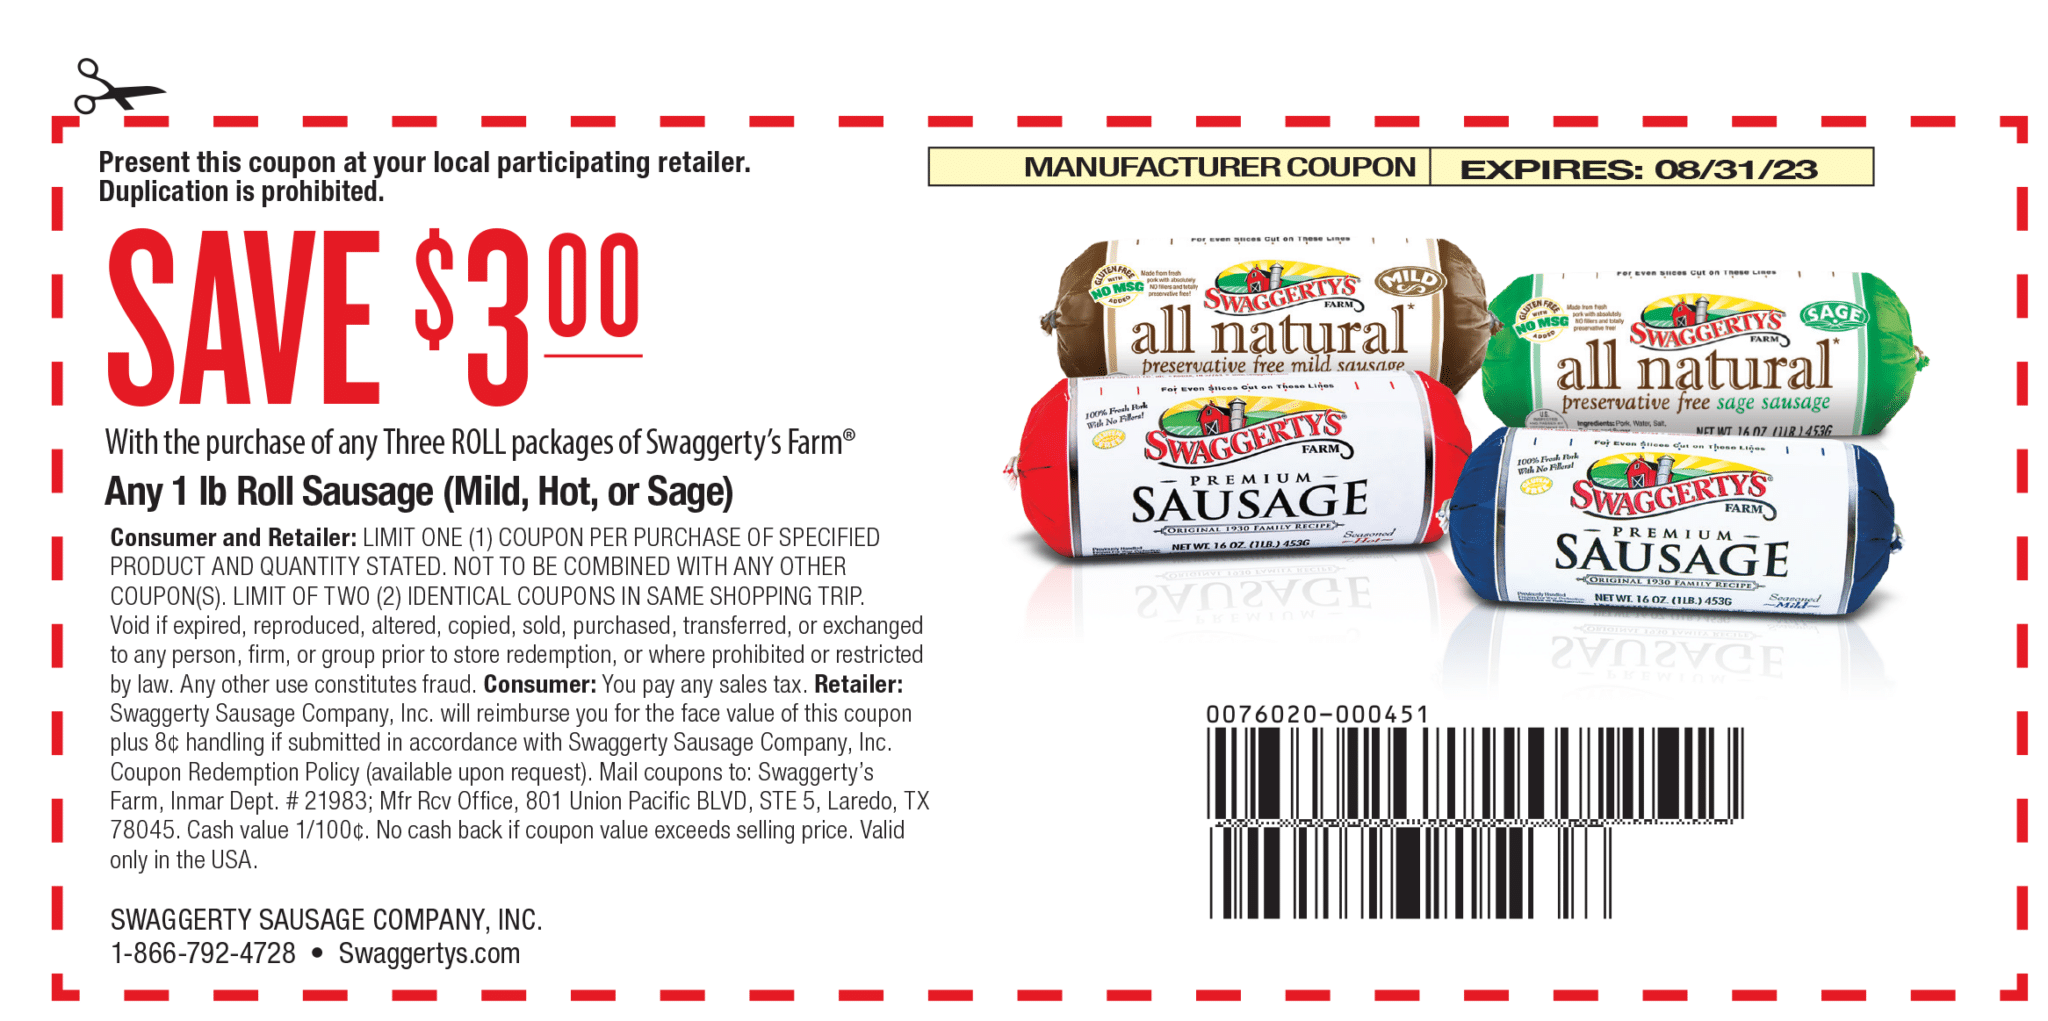 Swaggerty's Sausage Loyalty coupon for three dollars off rolled sausage.